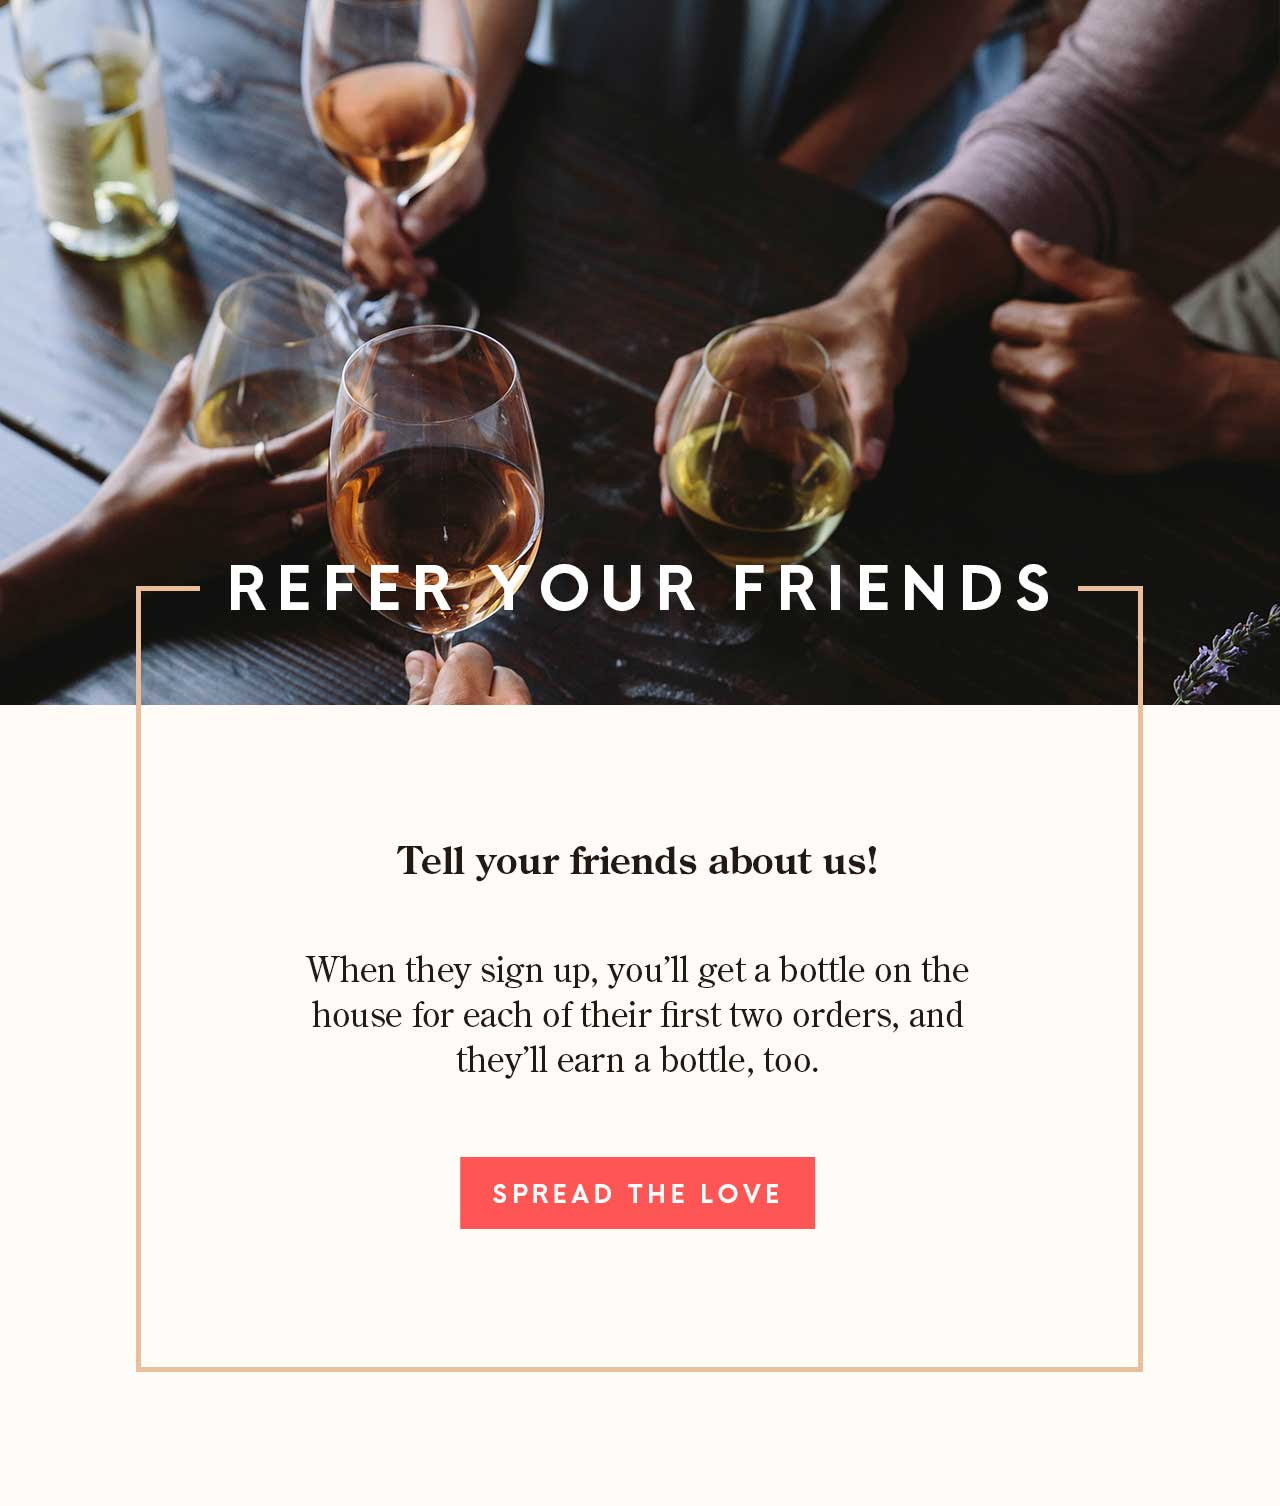 Tell your buddies about us! When they sign up, you’ll get a bottle on the house for each of their first two orders, and they’ll earn a bottle, too.